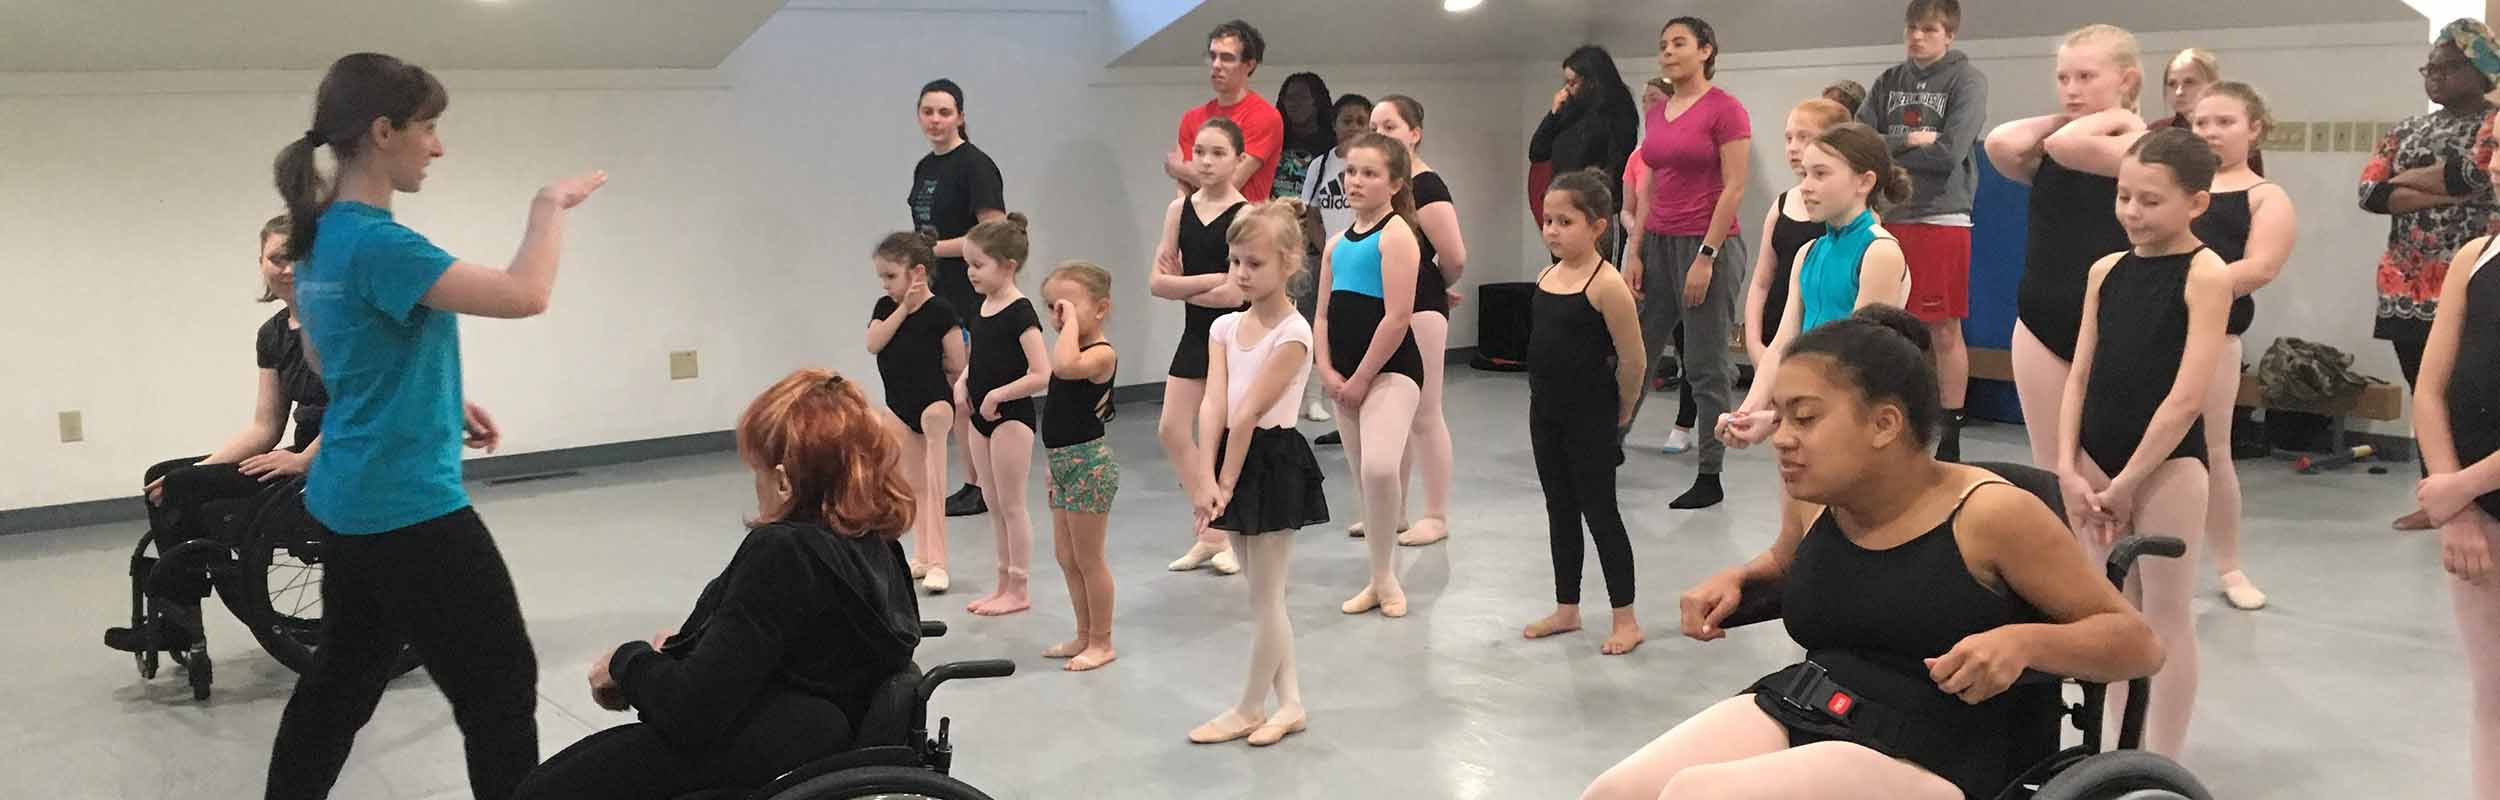 Dance teaching artists with and without disabilities leading a workshop class for students of all ages and abilities.